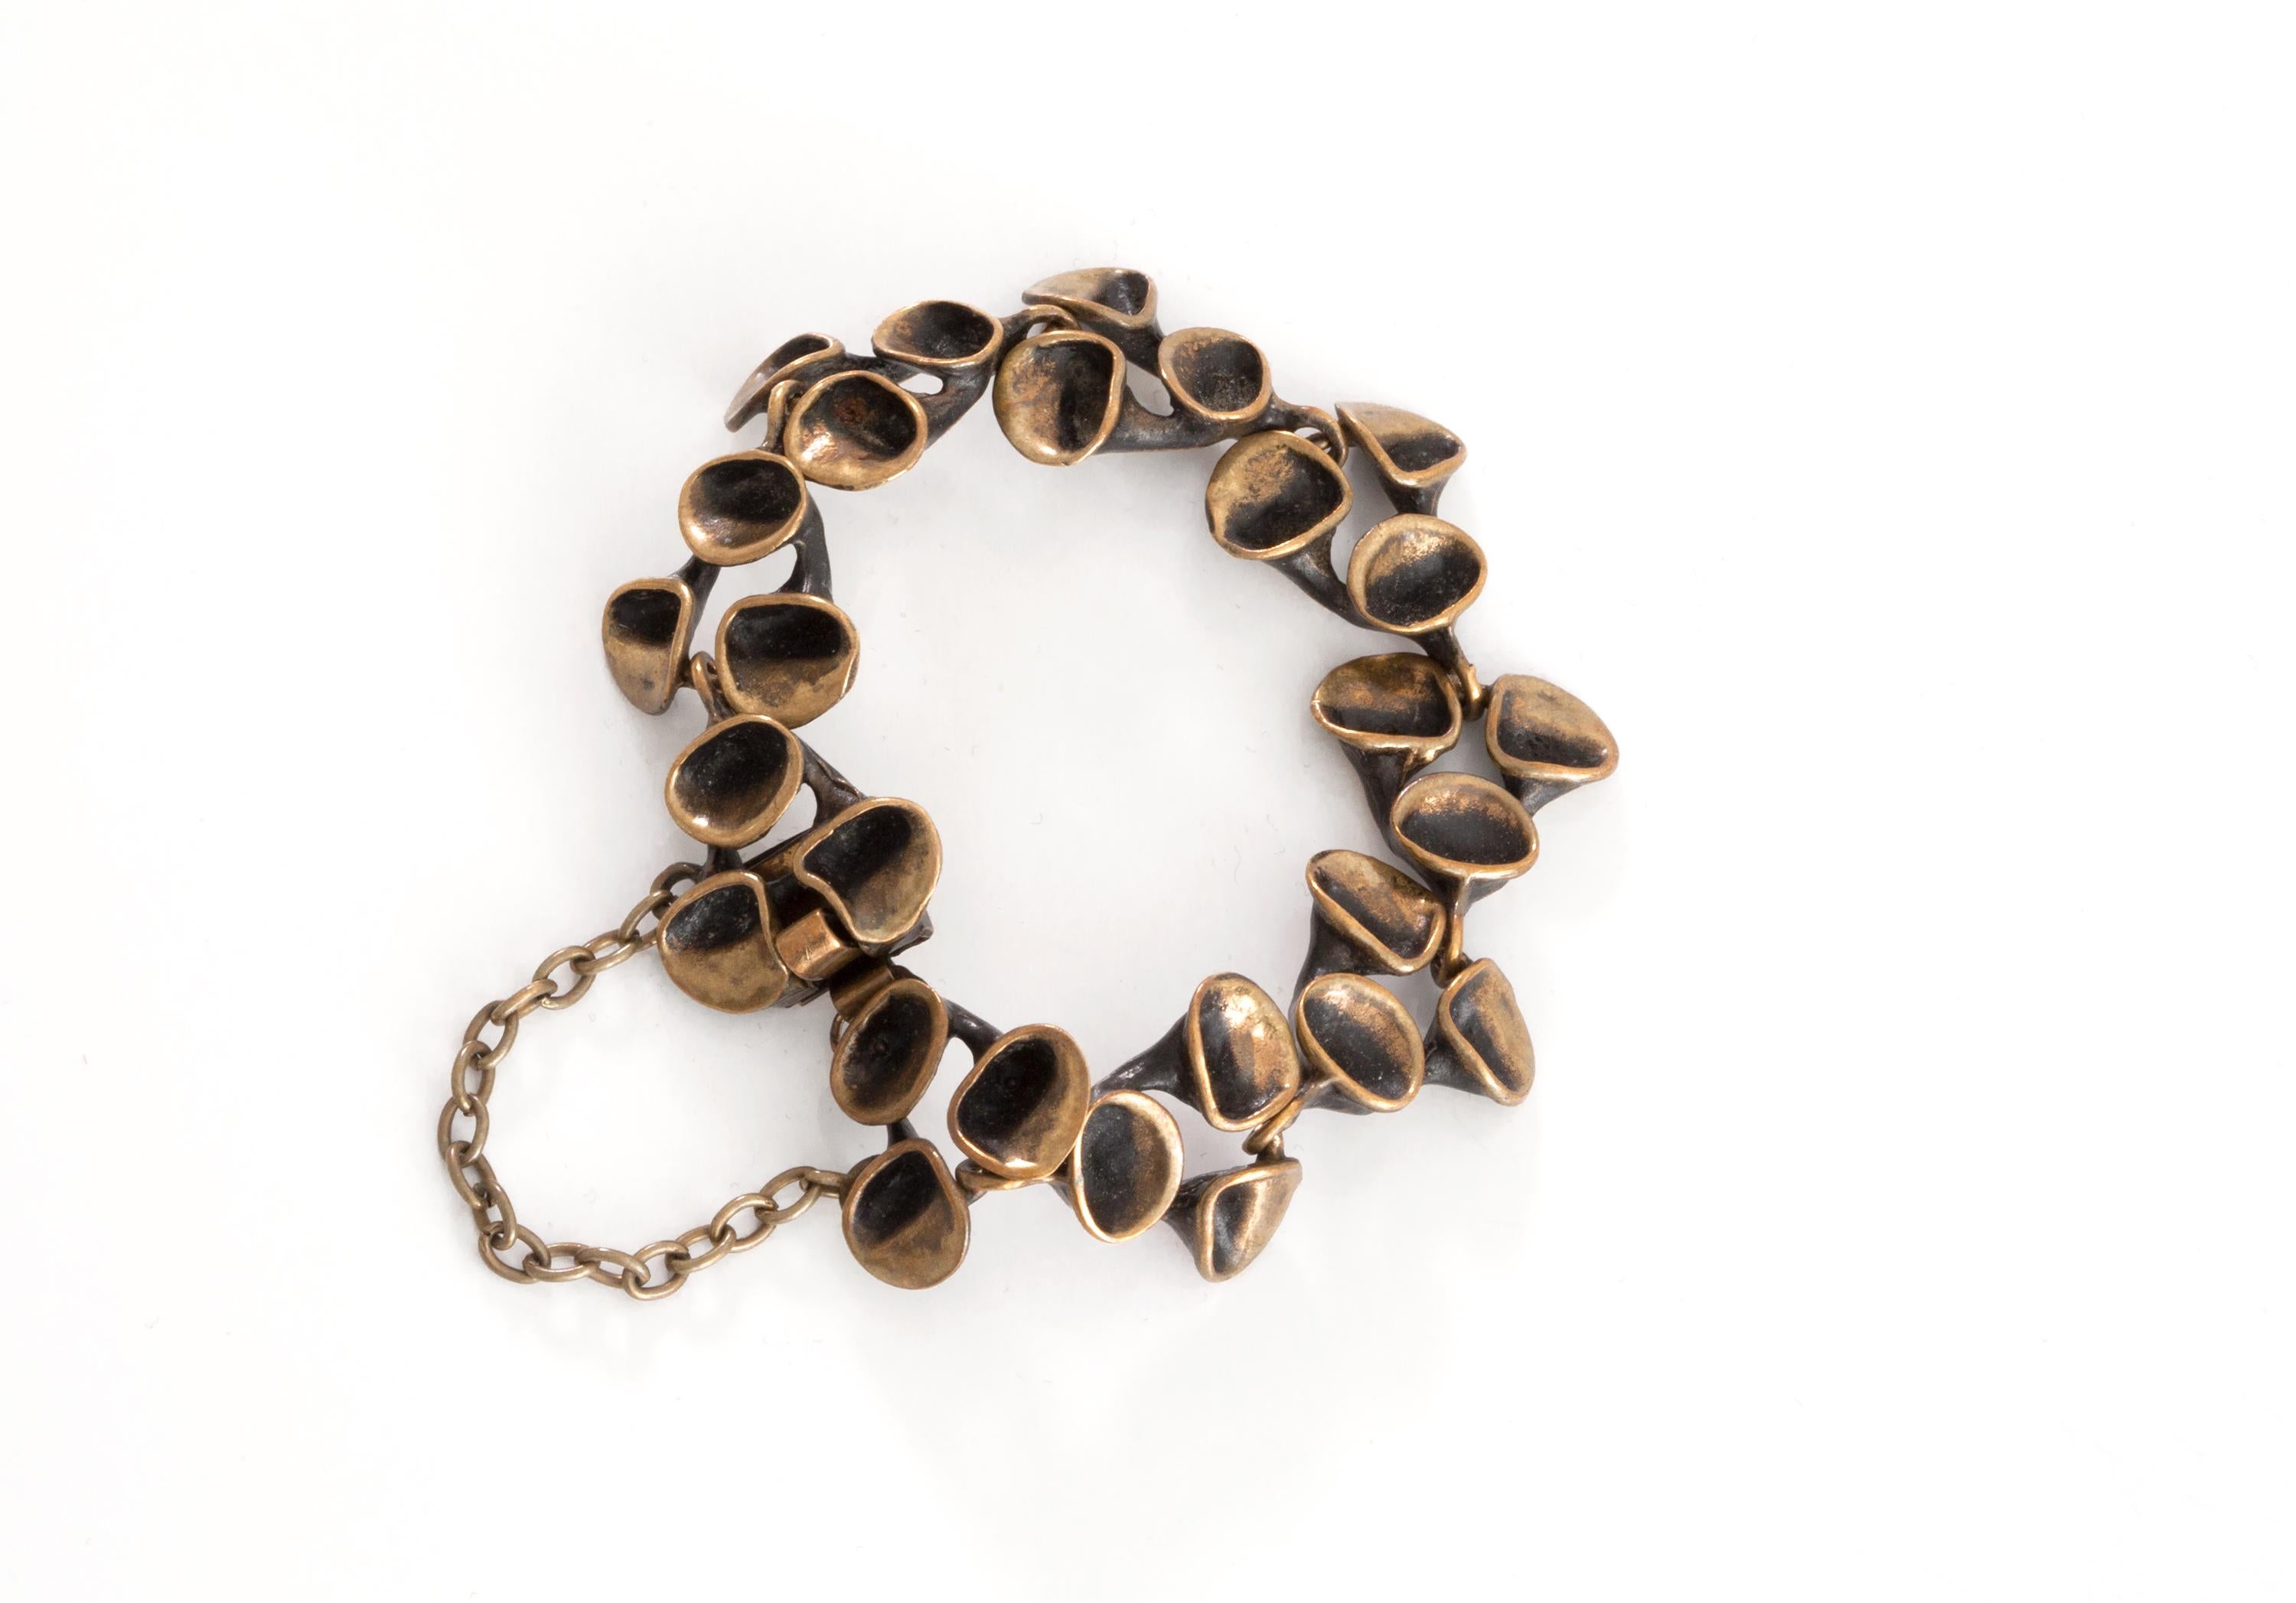 Organic and wonderful chain link bracelet by Finish silversmith Hannu Ikonen. Made in Finland, ca 1970s first half. The bracelet is in very good vintage condition. 